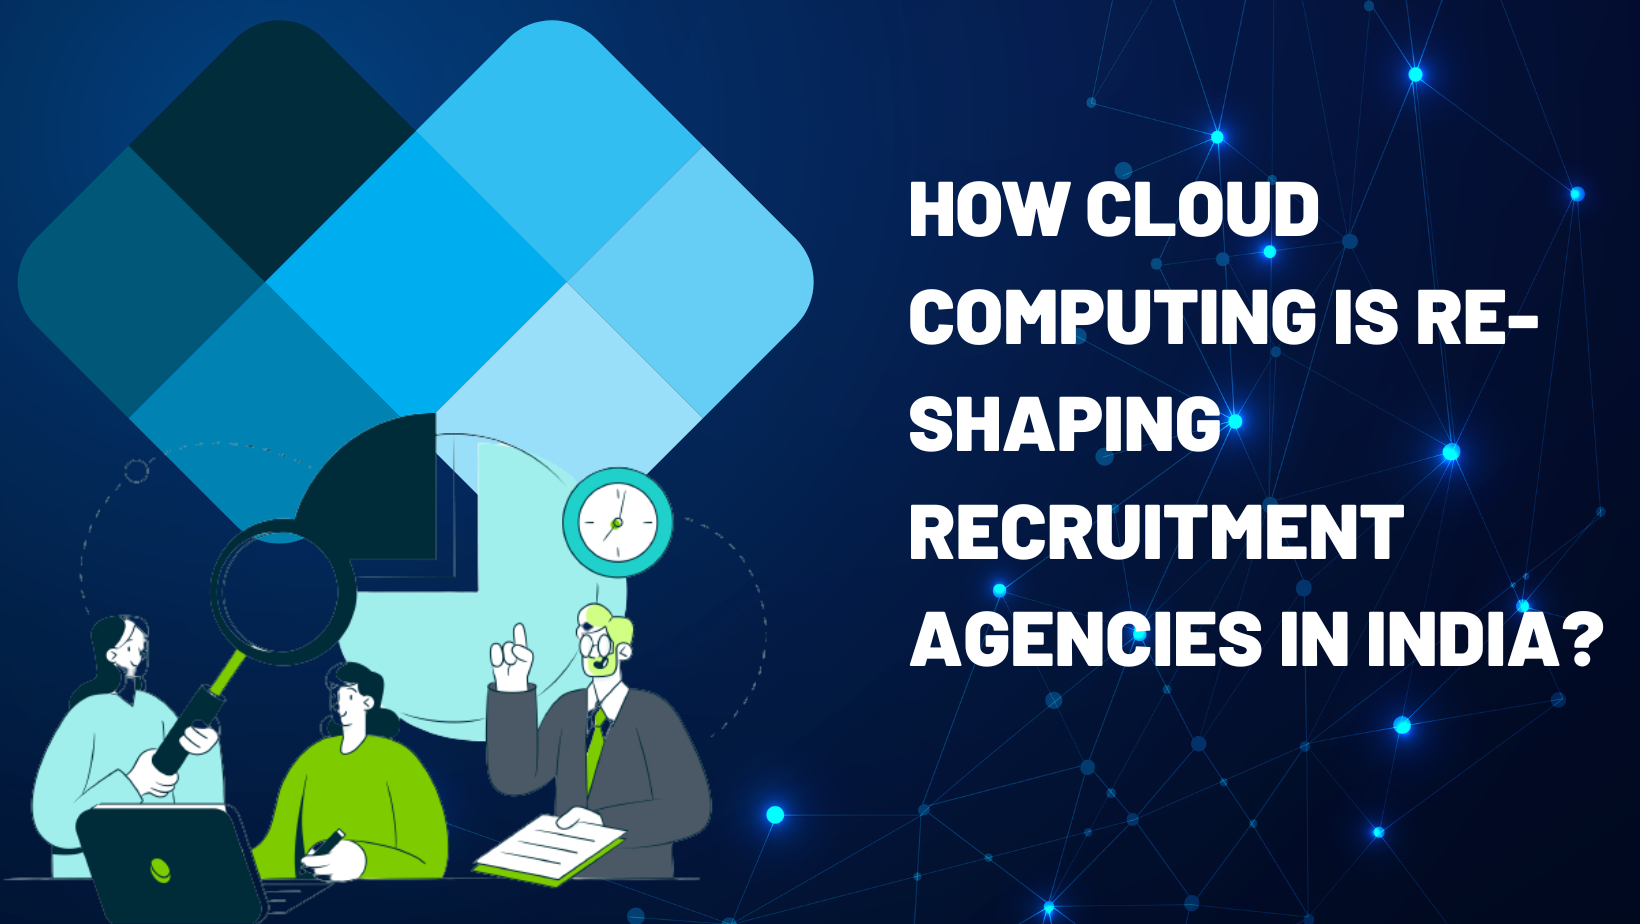 How Cloud computing is re-shaping Recruitment agencies in India?